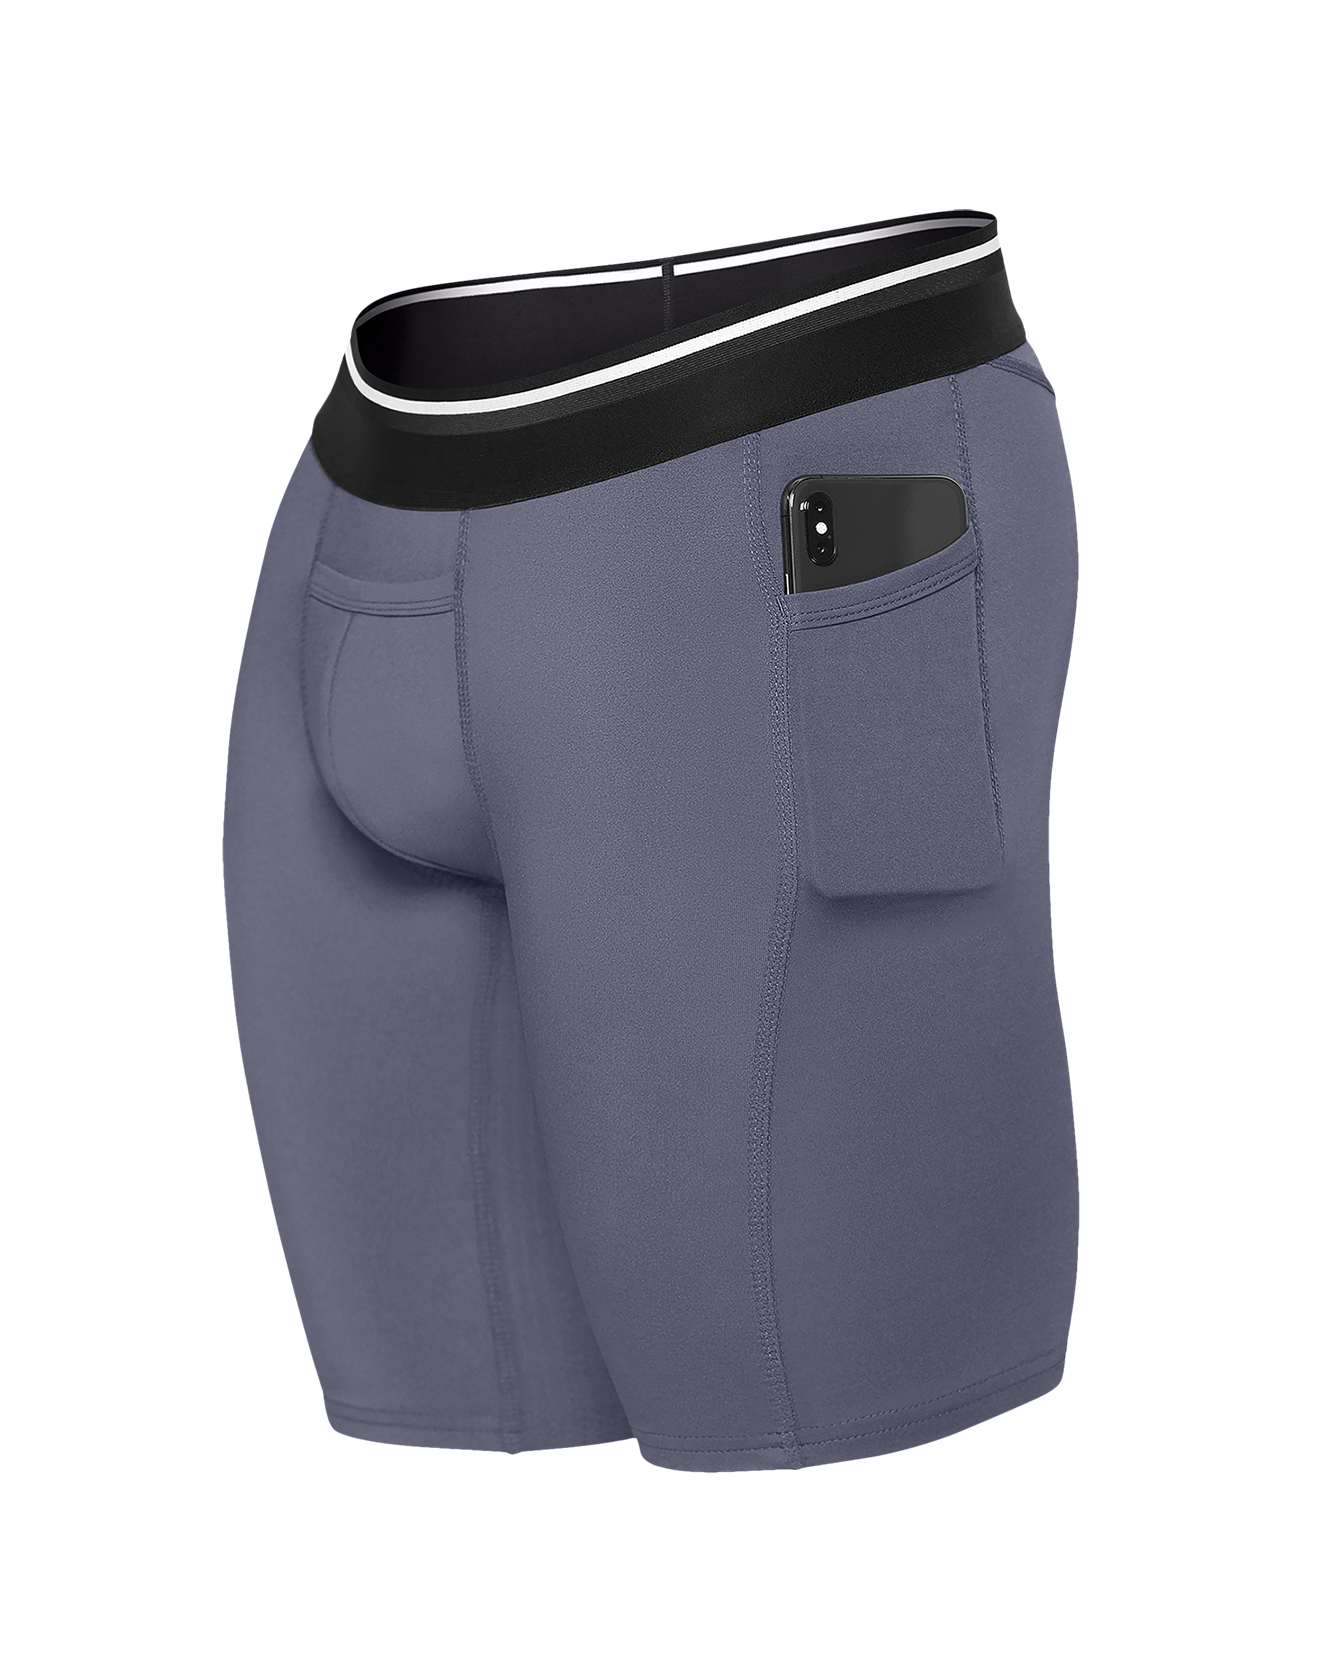 Endurance Compression Shorts for Men– Citizens Athletic Baselayer|All